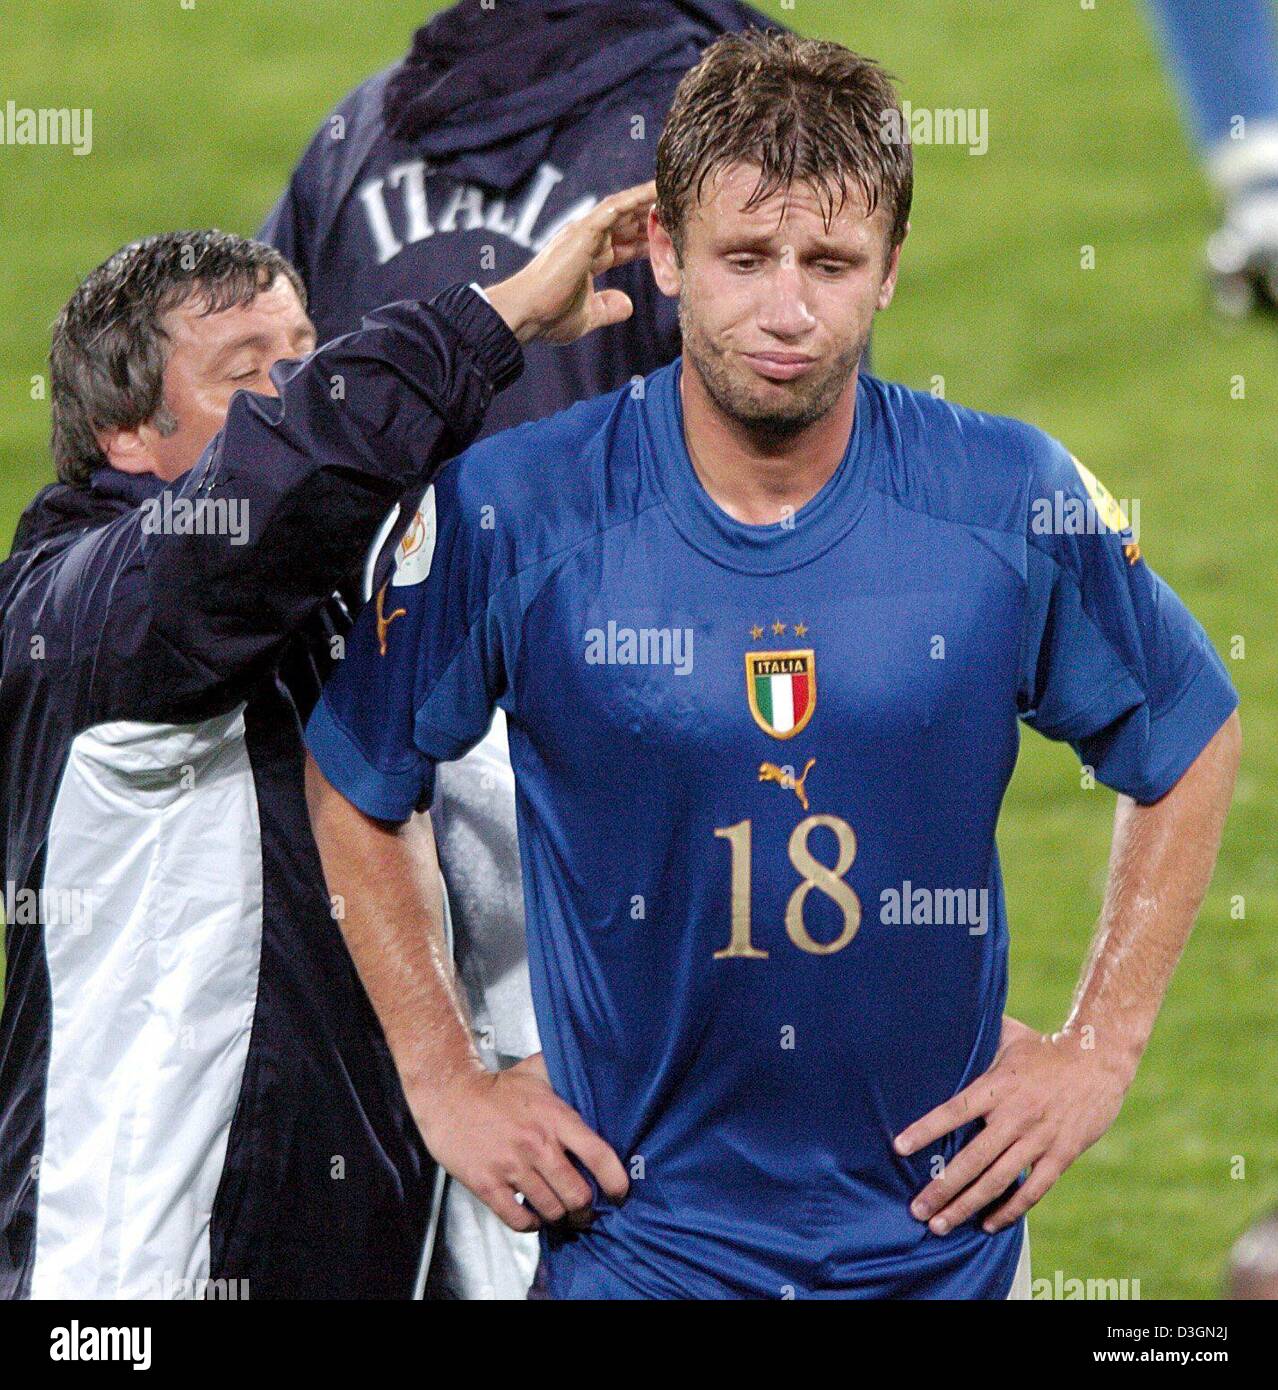 (dpa) - Italy forward Antonio Cassano (R) is inconsolable as he walks off the pitch after the end of the game. The Italian national soccer team wins their final Euro 2004 group C match against Bulgaria at Estadio Dom Afonso Henrique in Guimaraes, Portugal, 22 June 2004. Cassano had scored the winning goal in injury time to ensure a last minute victory but the 2-1 win was not enough Stock Photo